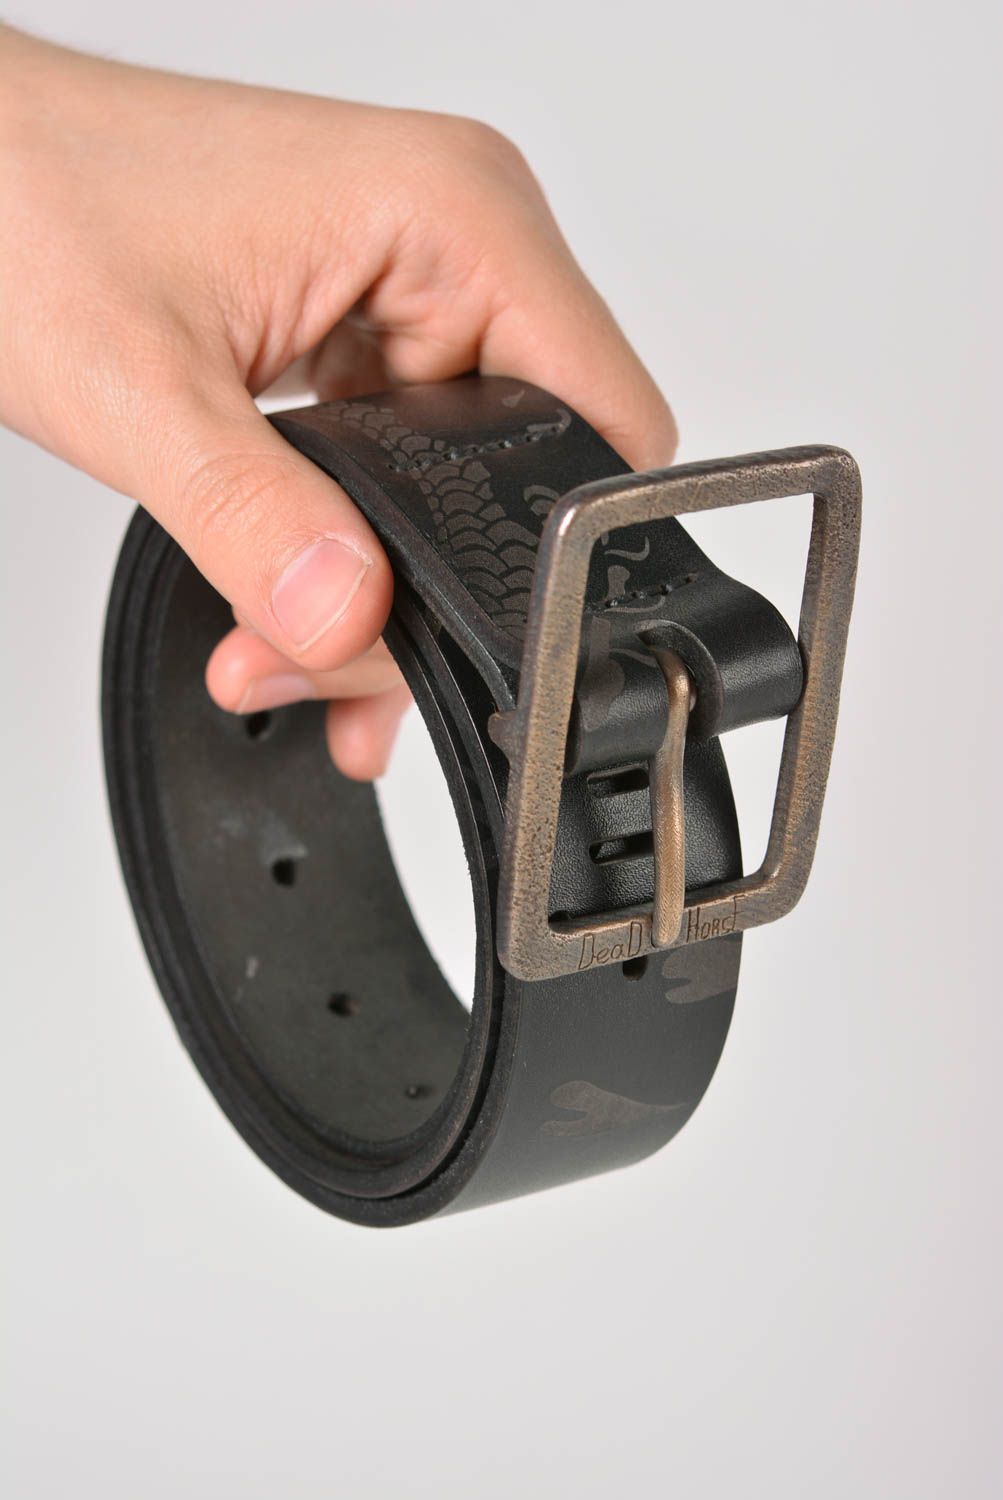 Handmade leather belt men accessories birthday gifts for him leather goods photo 3